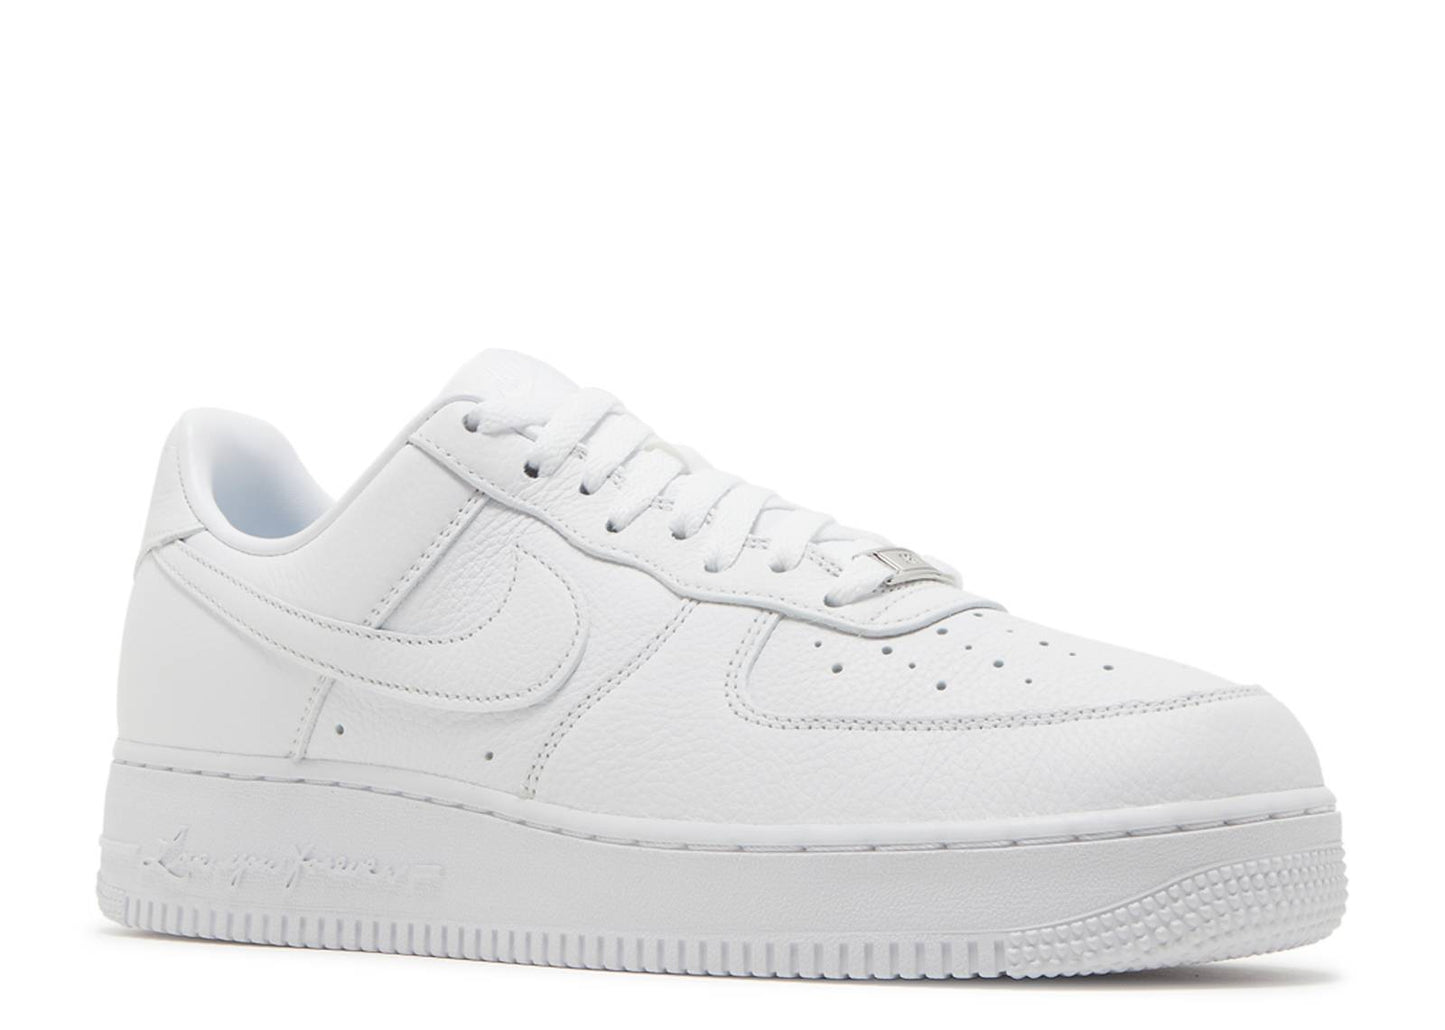 NOCTA x Nike Air Force 1 Low "Certified Lover Boy"